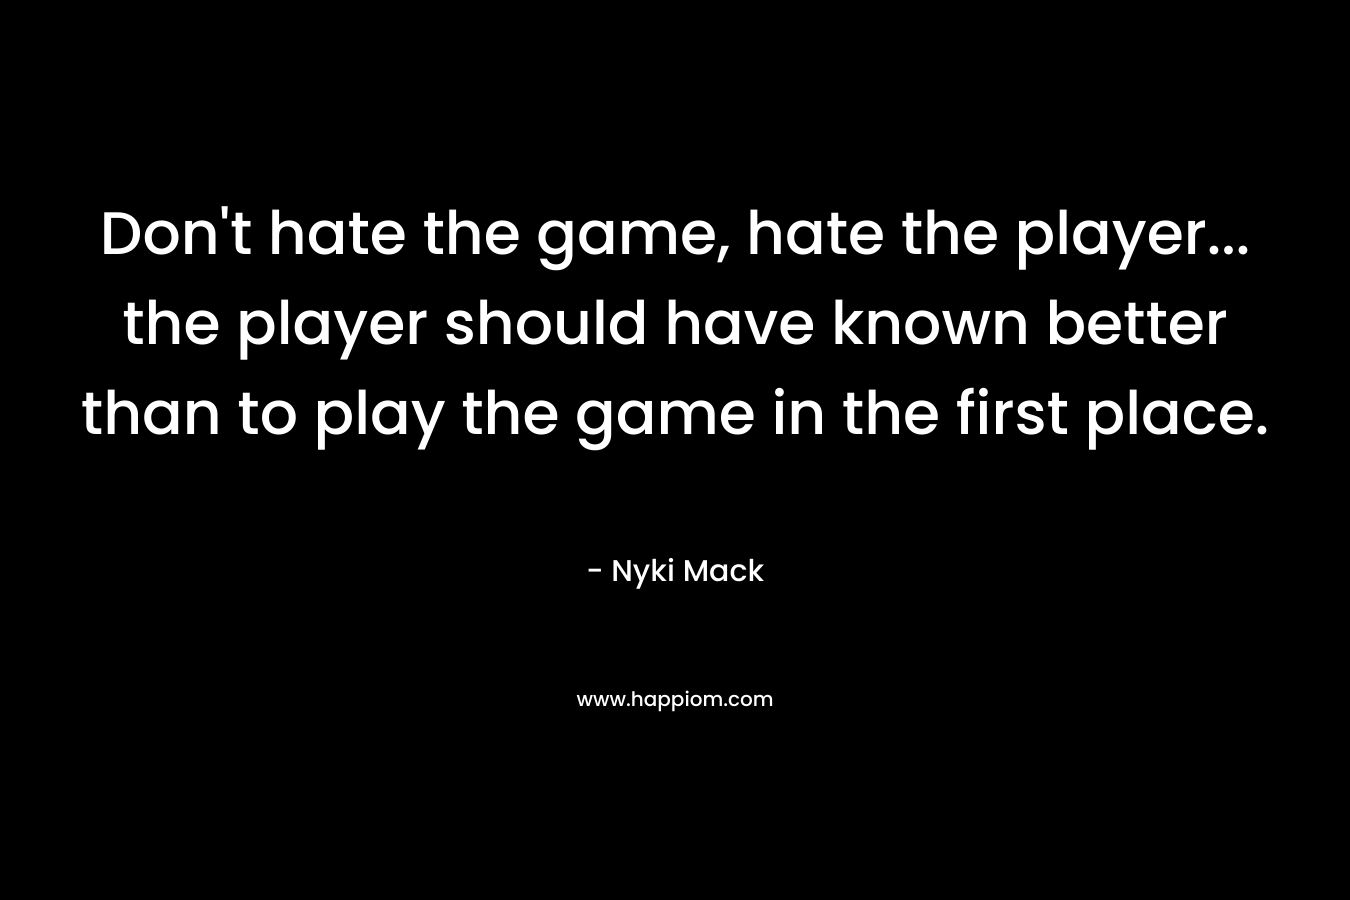 Don't hate the game, hate the player... the player should have known better than to play the game in the first place.